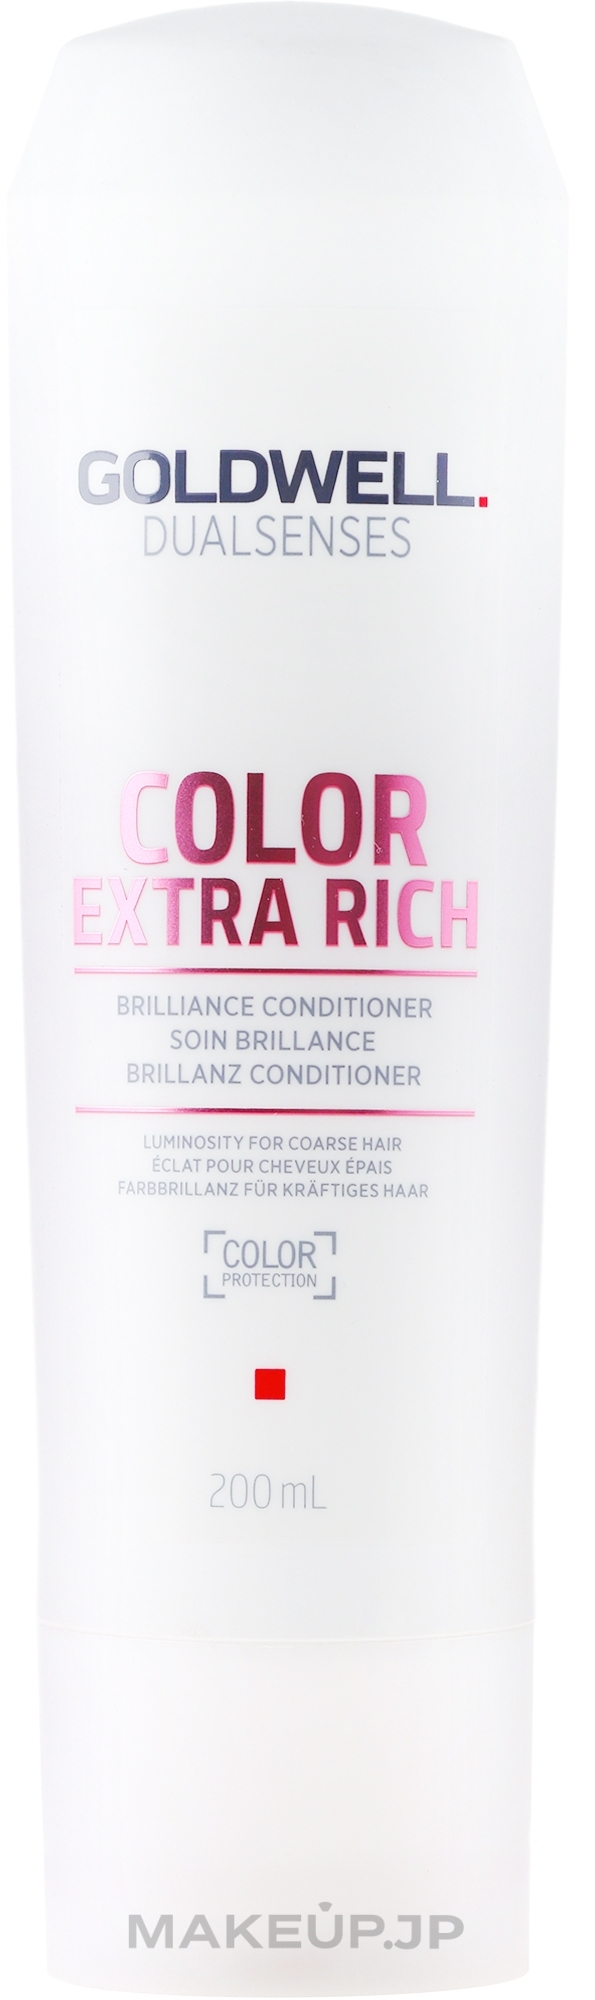 Intensive Shine Conditioner for Colored Hair - Goldwell Dualsenses Color Extra Rich Brilliance Conditioner — photo 200 ml